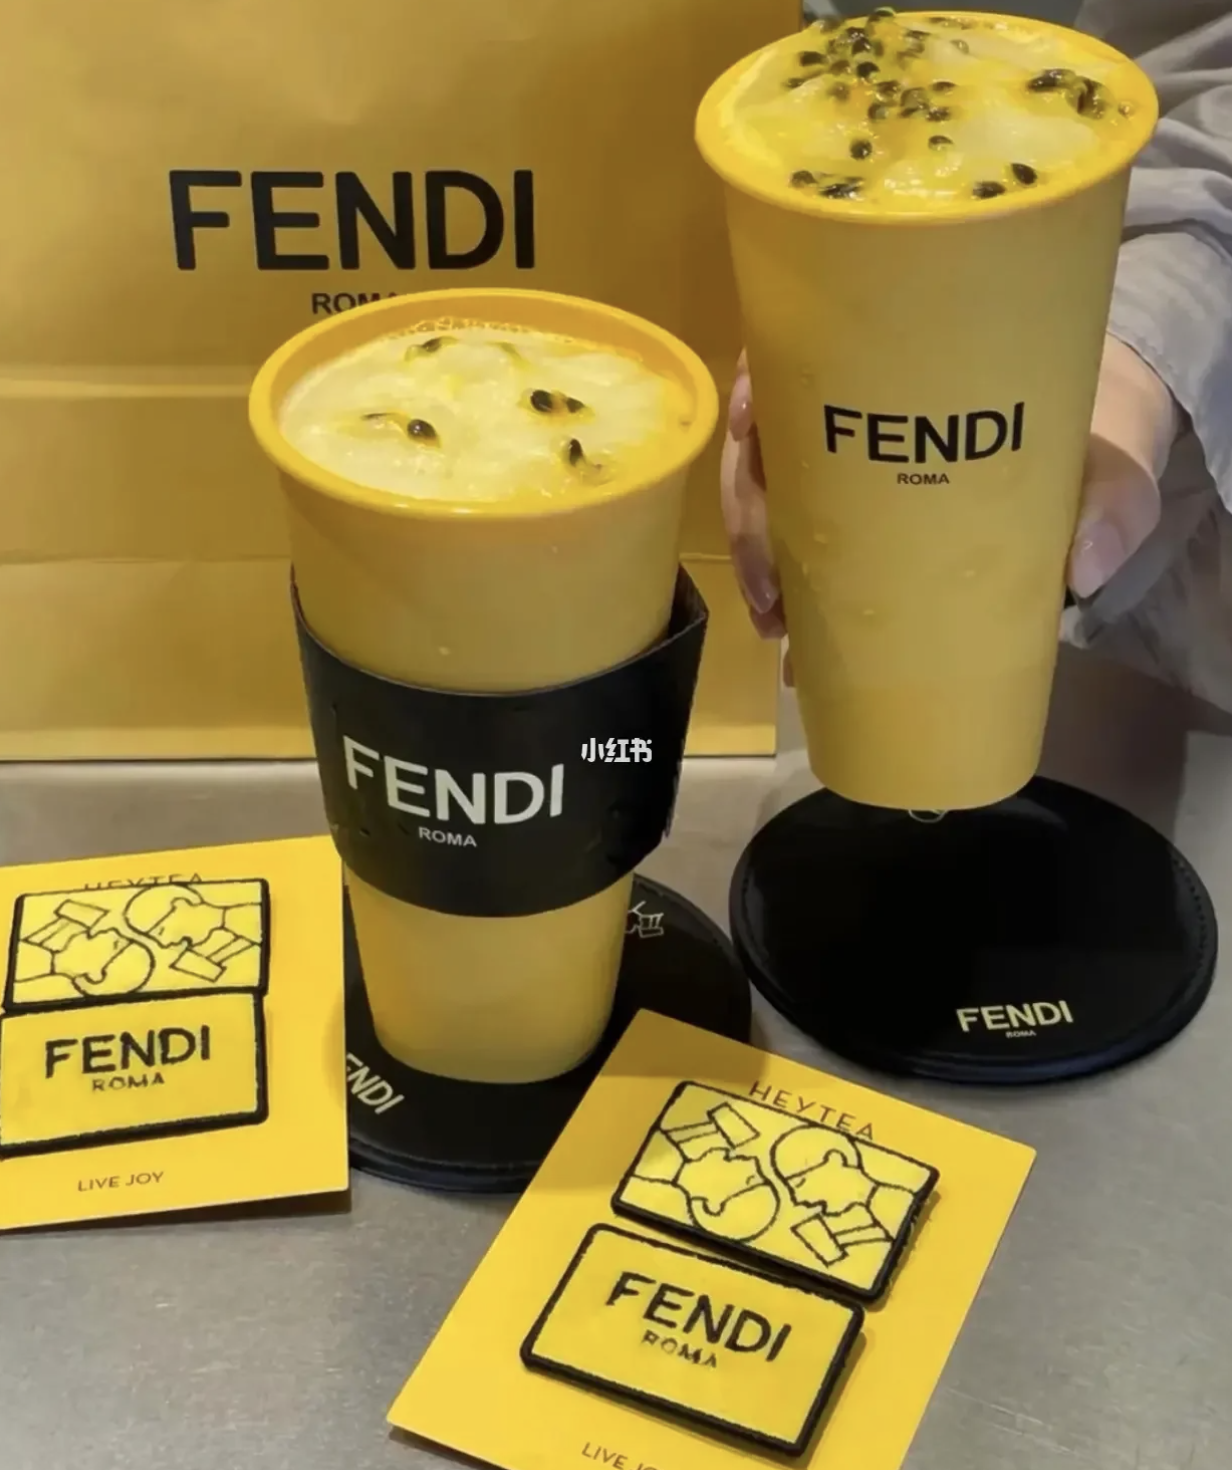 Heytea & Fendi collab in China, drink apparently costs S$3.65 ...